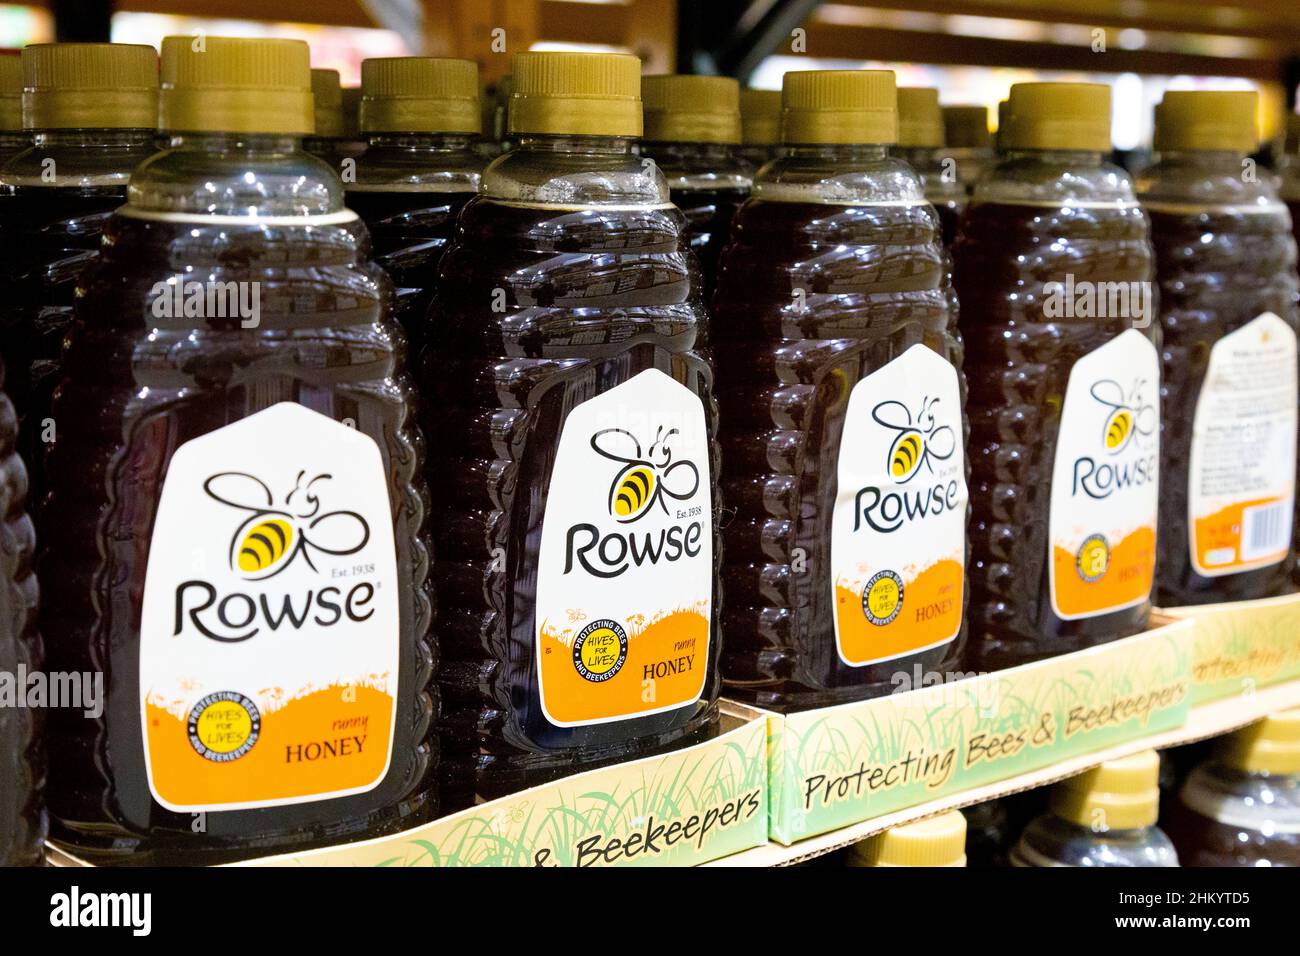 Bottles of runny Rowse Honey at a supermarket Stock Photo